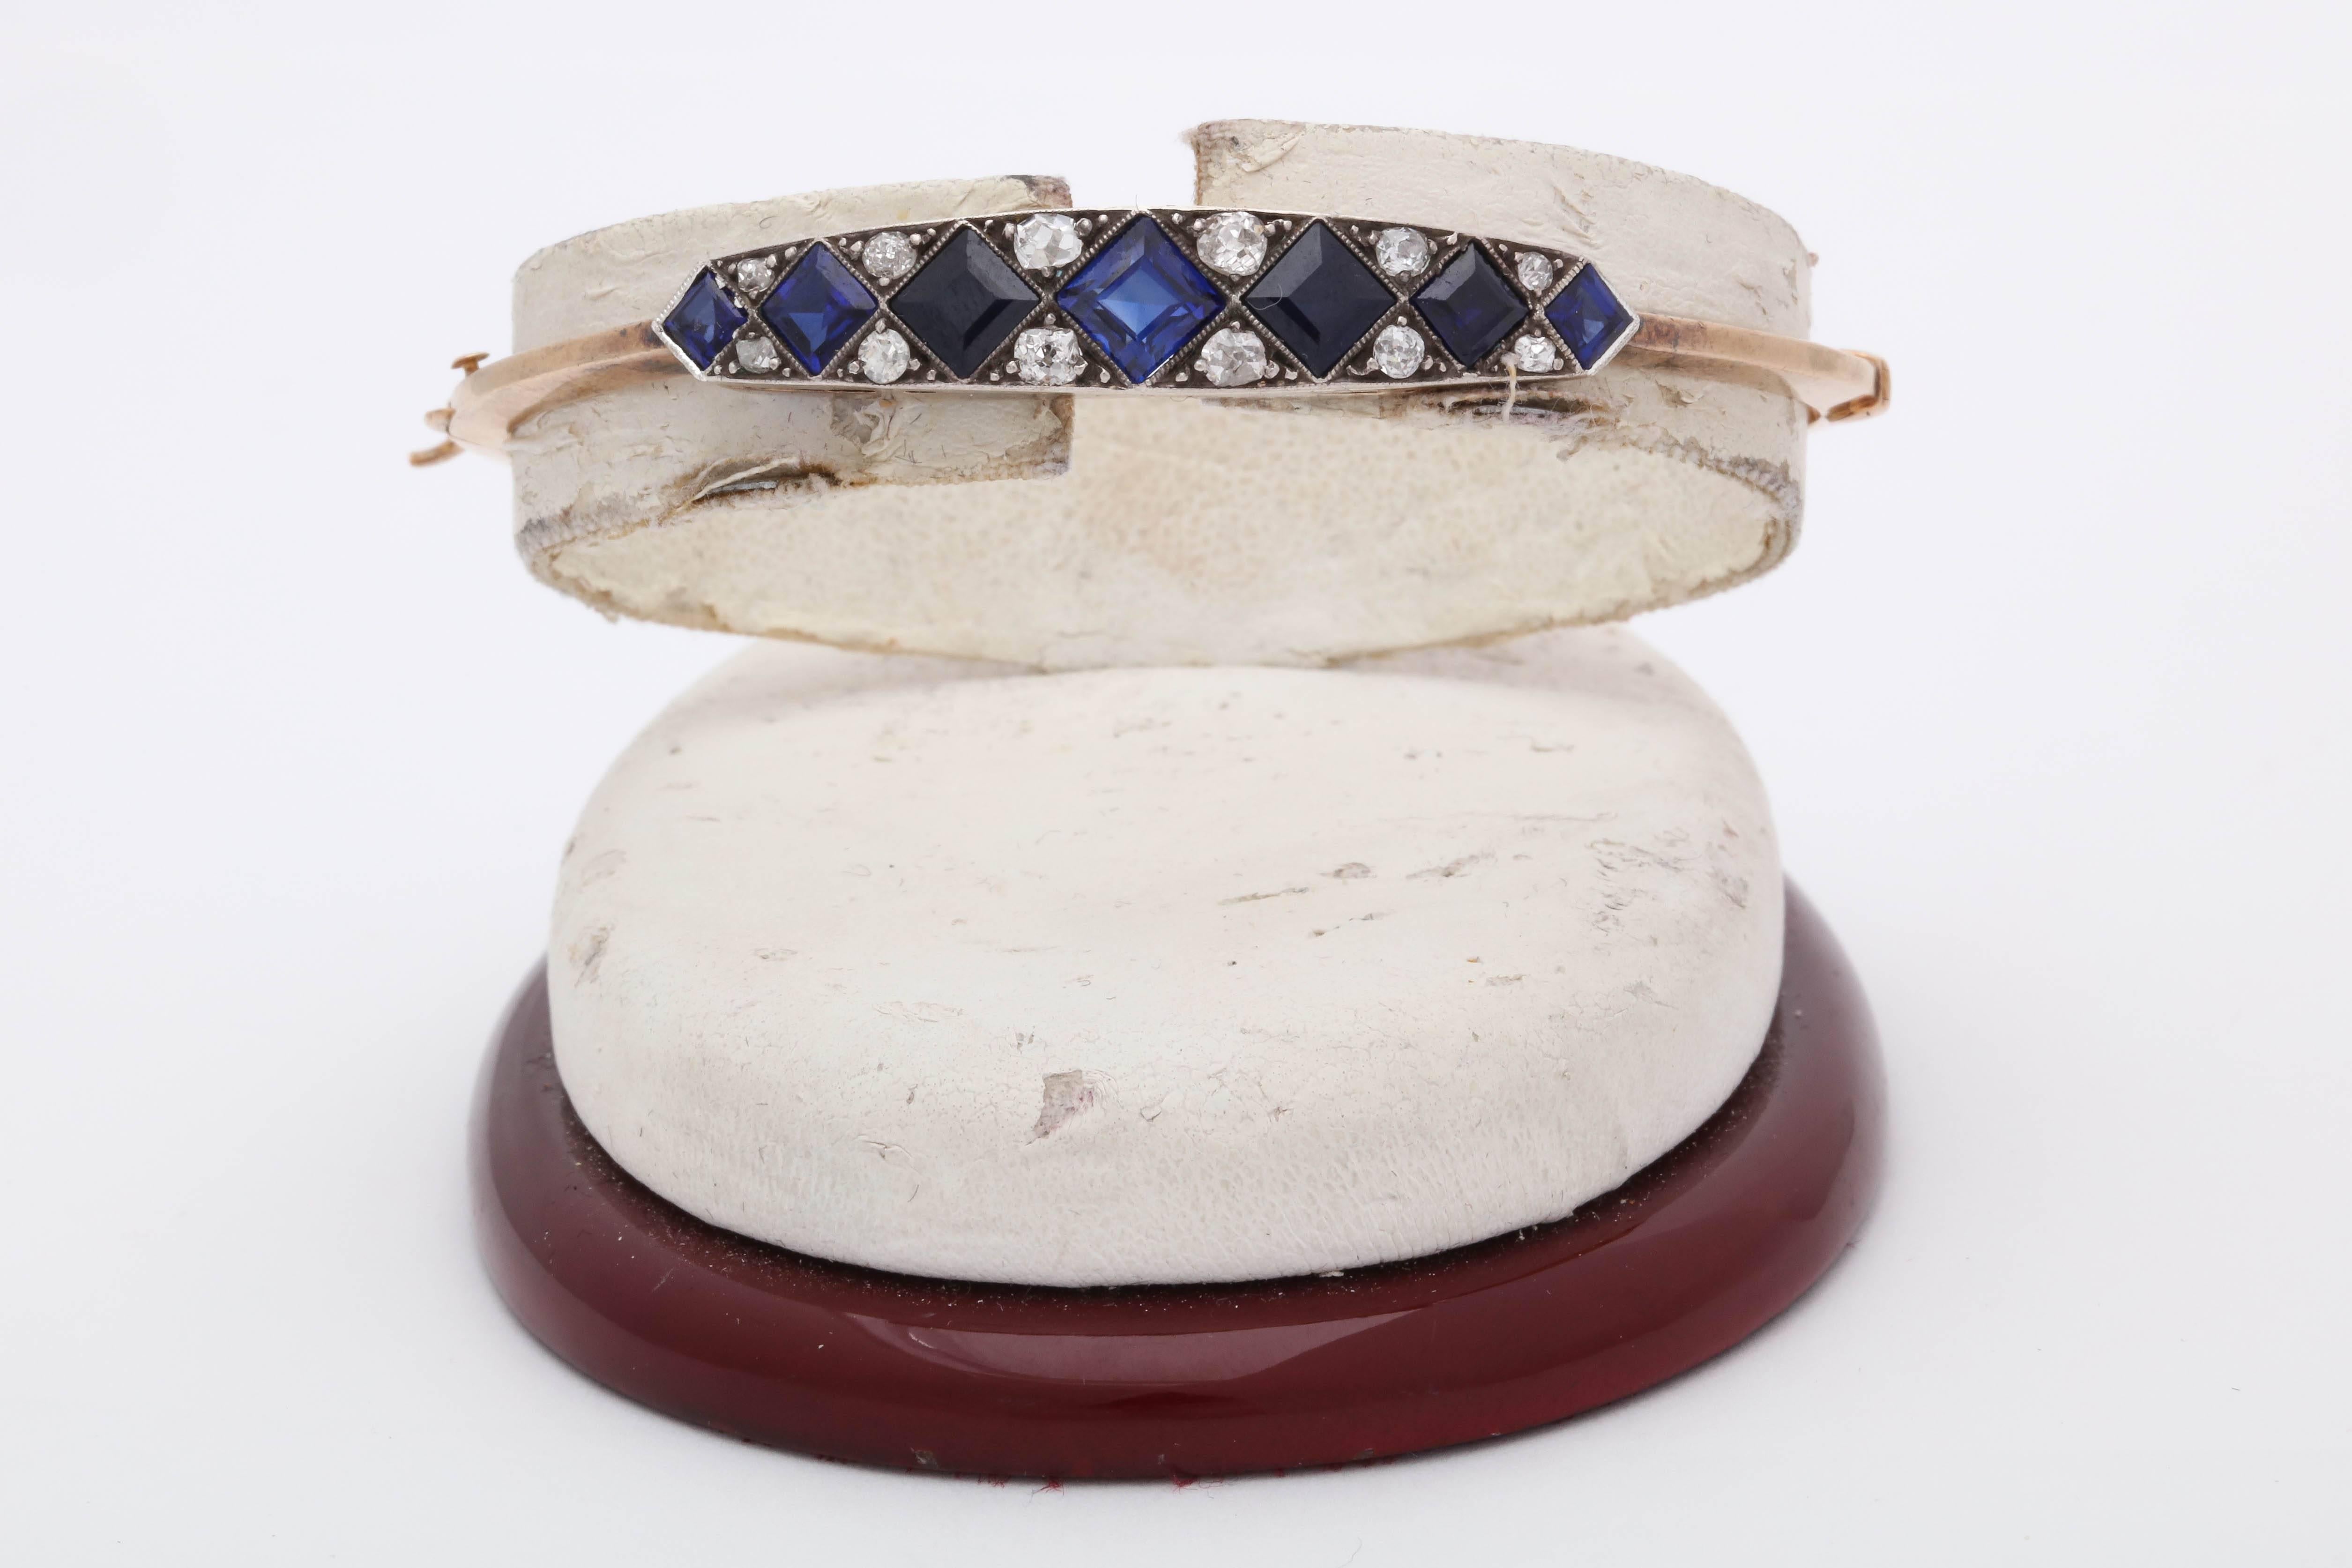 One Ladies Edwardian Bangle Style Bracelet Created In 18kt Yellow Gold With A Platinum Setting On Top. Bangle Bracelet Is Embellished With Seven Custom Design Step Cut Sapphires Weighing Approximately 1.75 Cts And Also Designed With Twelve Mine Cut